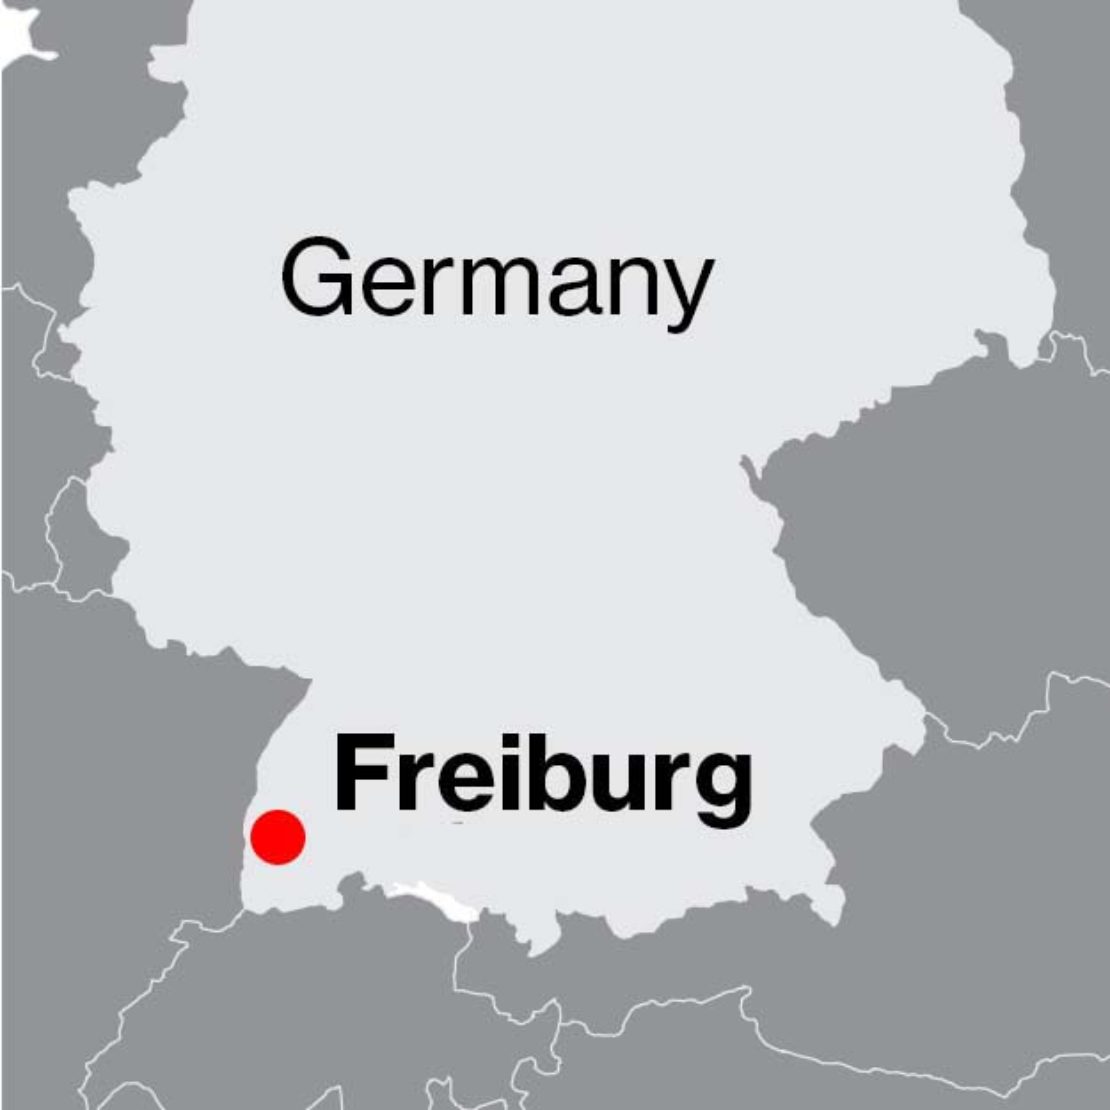 Map of Freiburg's location in the south-west of Germany